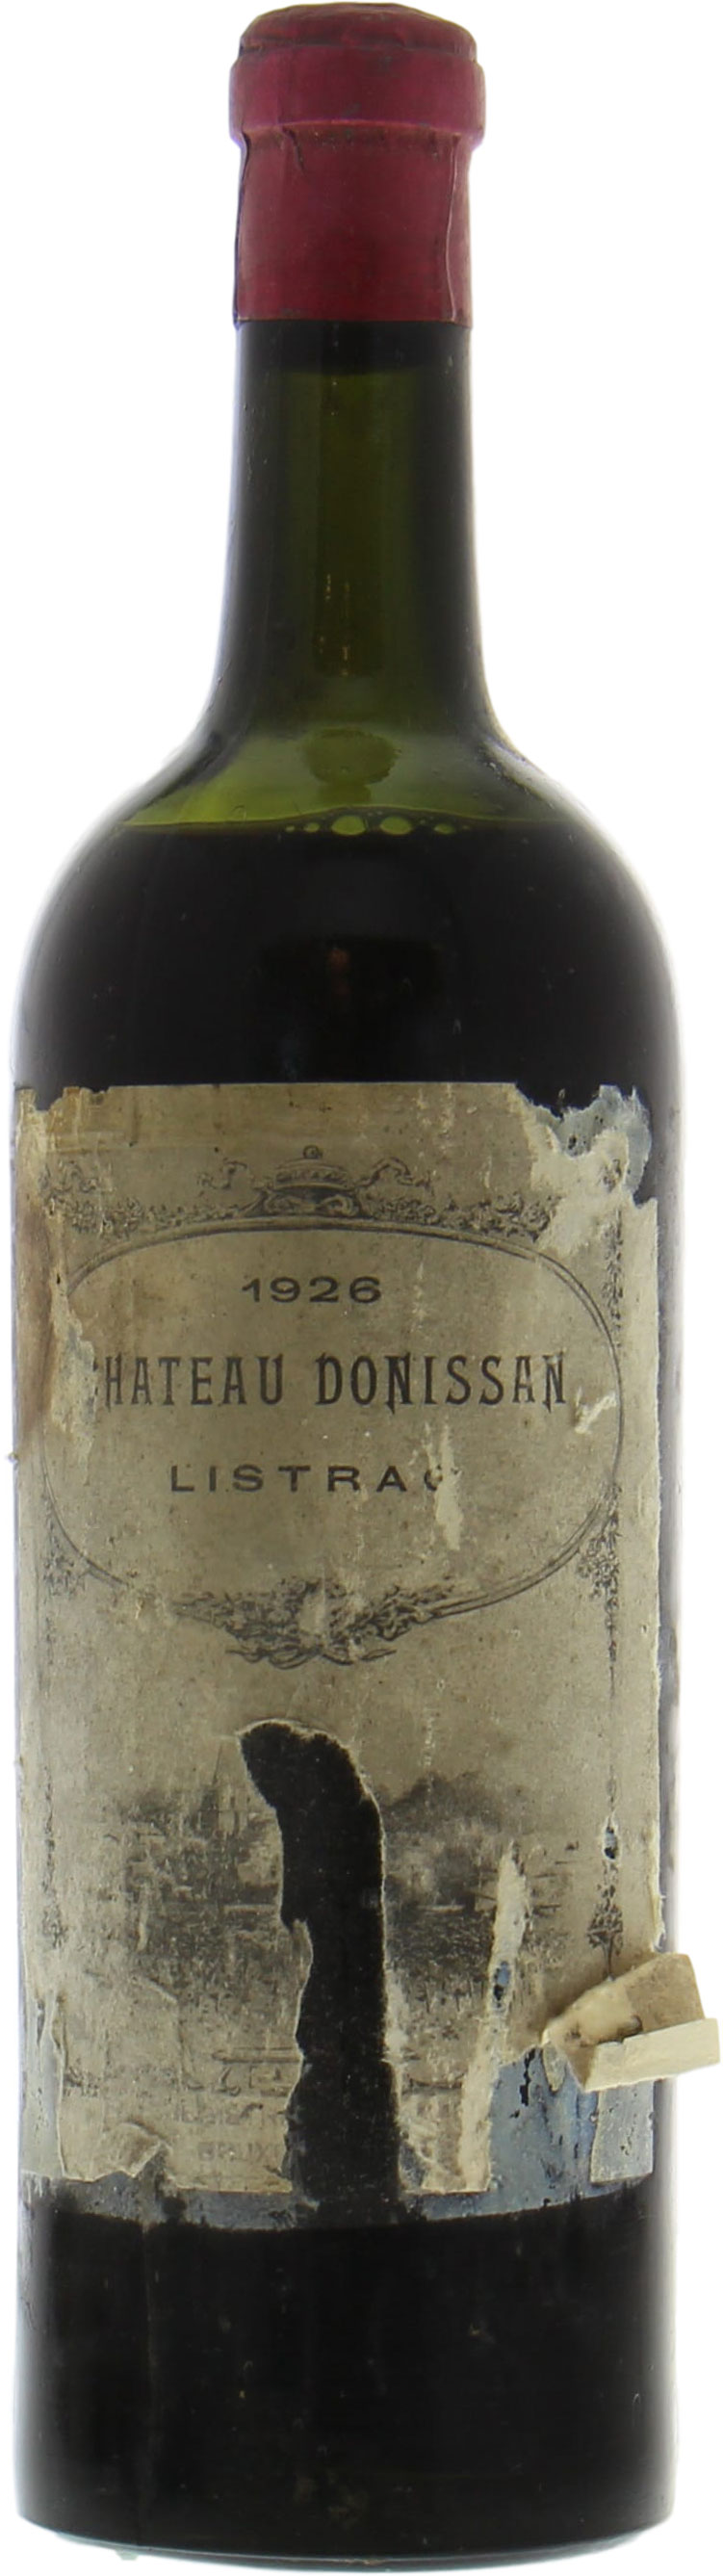 Chateau Donissan - Chateau Donissan 1926